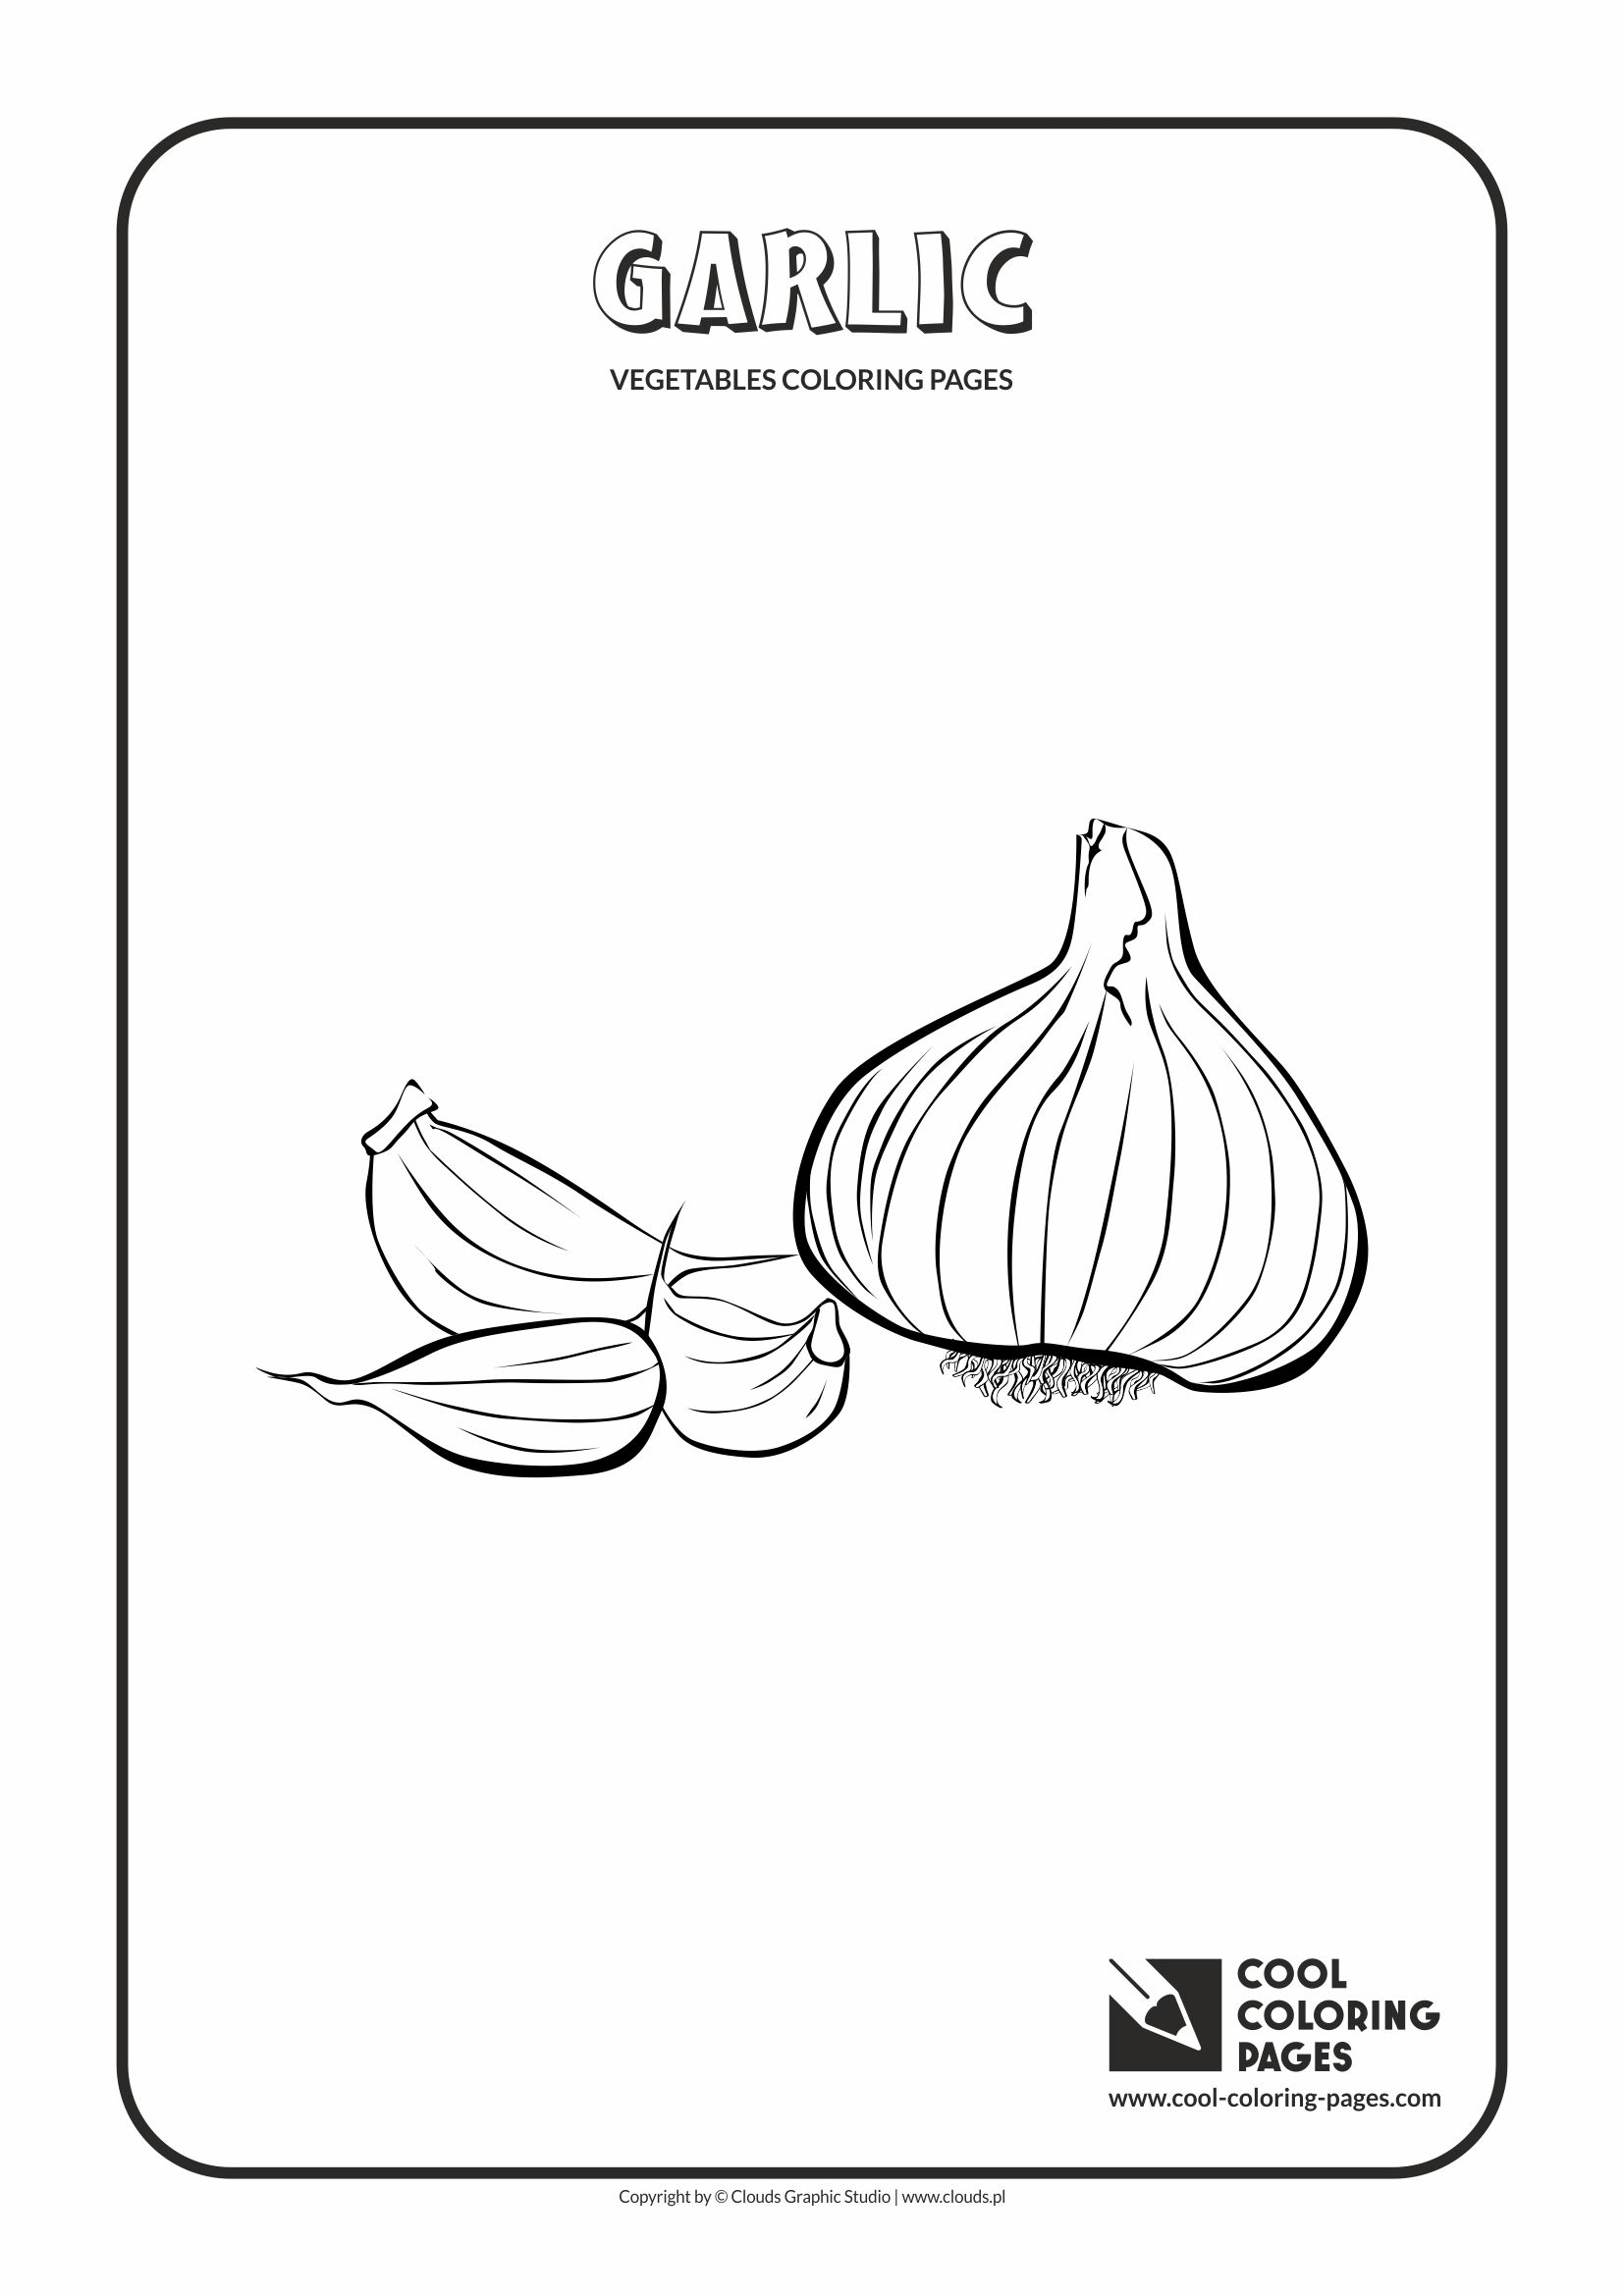 Vegetables Coloring Page Cool Coloring Pages Vegetables Coloring Pages Cool Coloring Pages